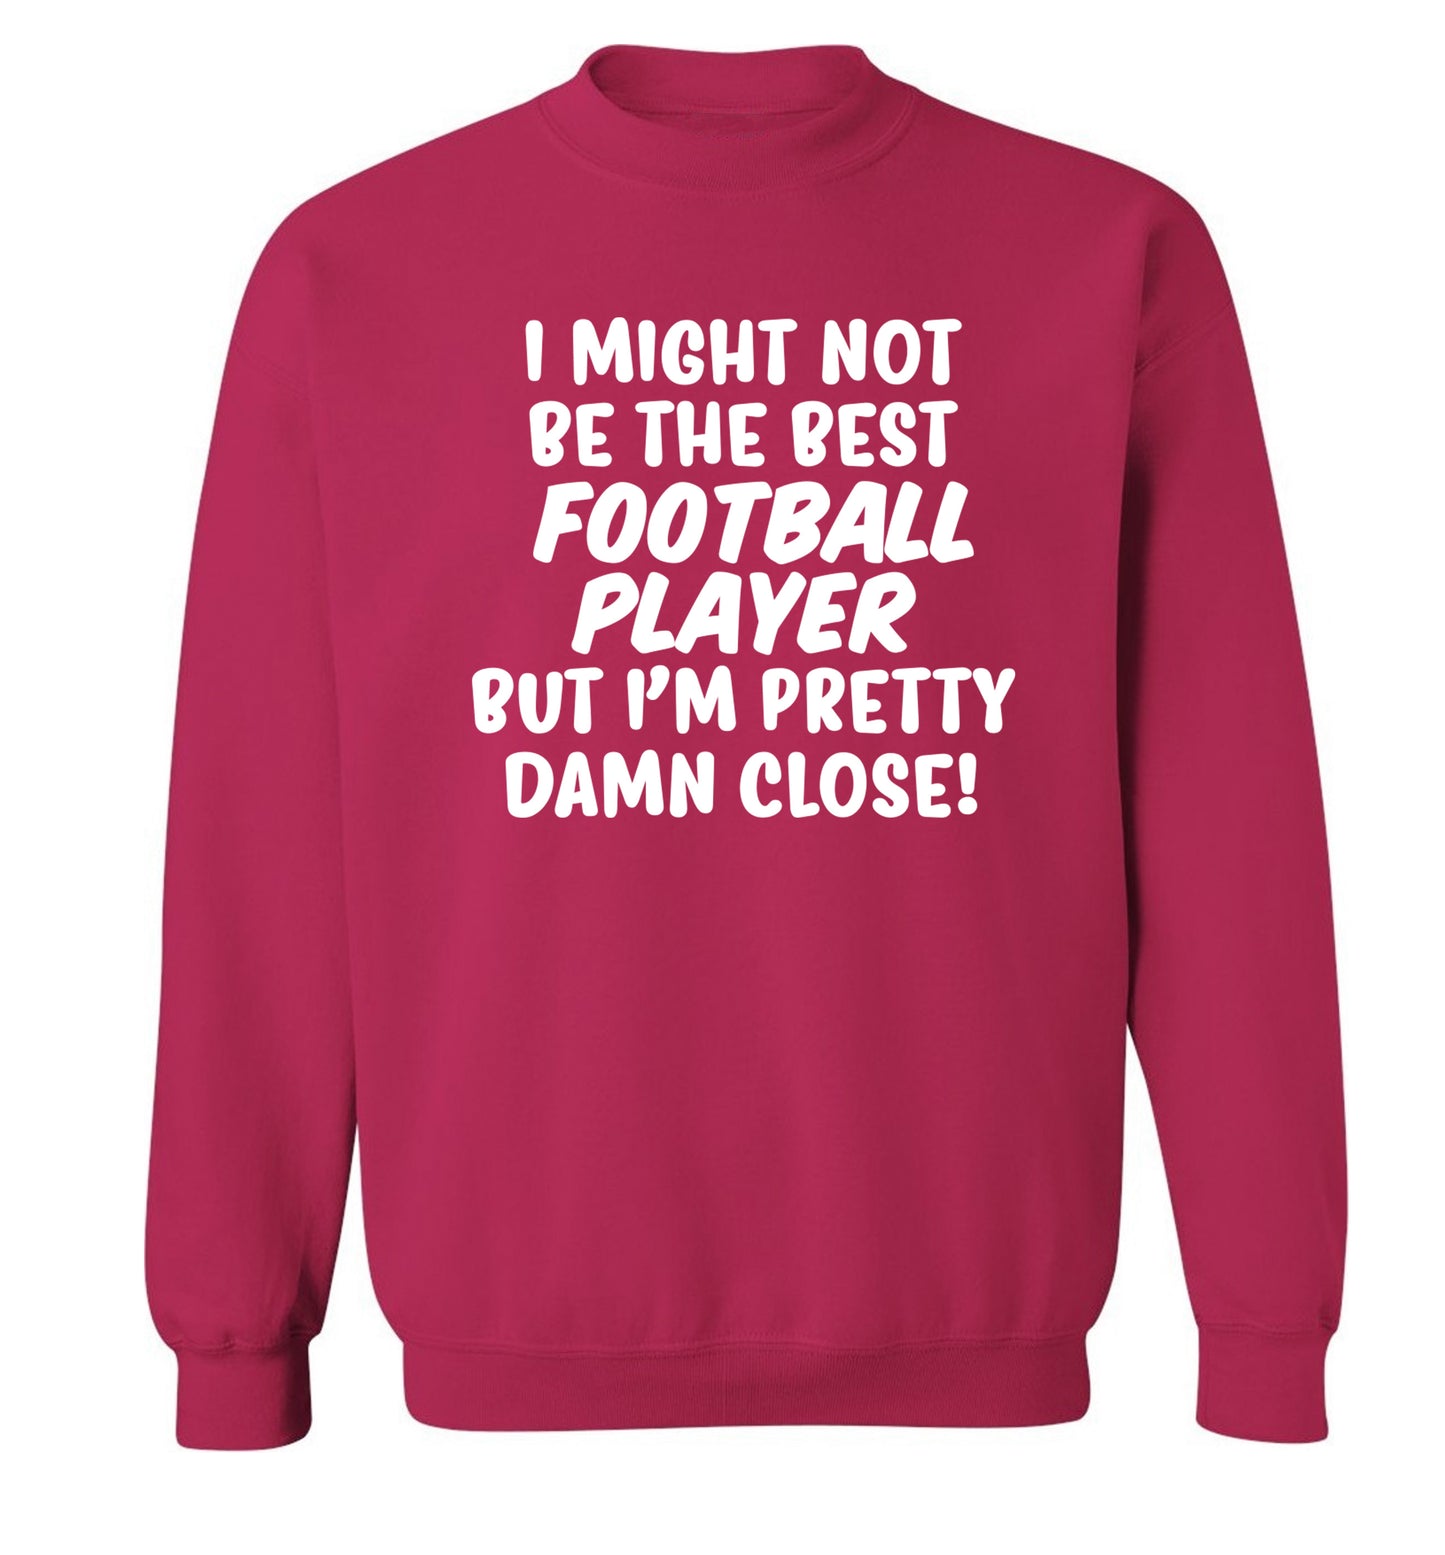 I might not be the best football player but I'm pretty close! Adult's unisexpink Sweater 2XL